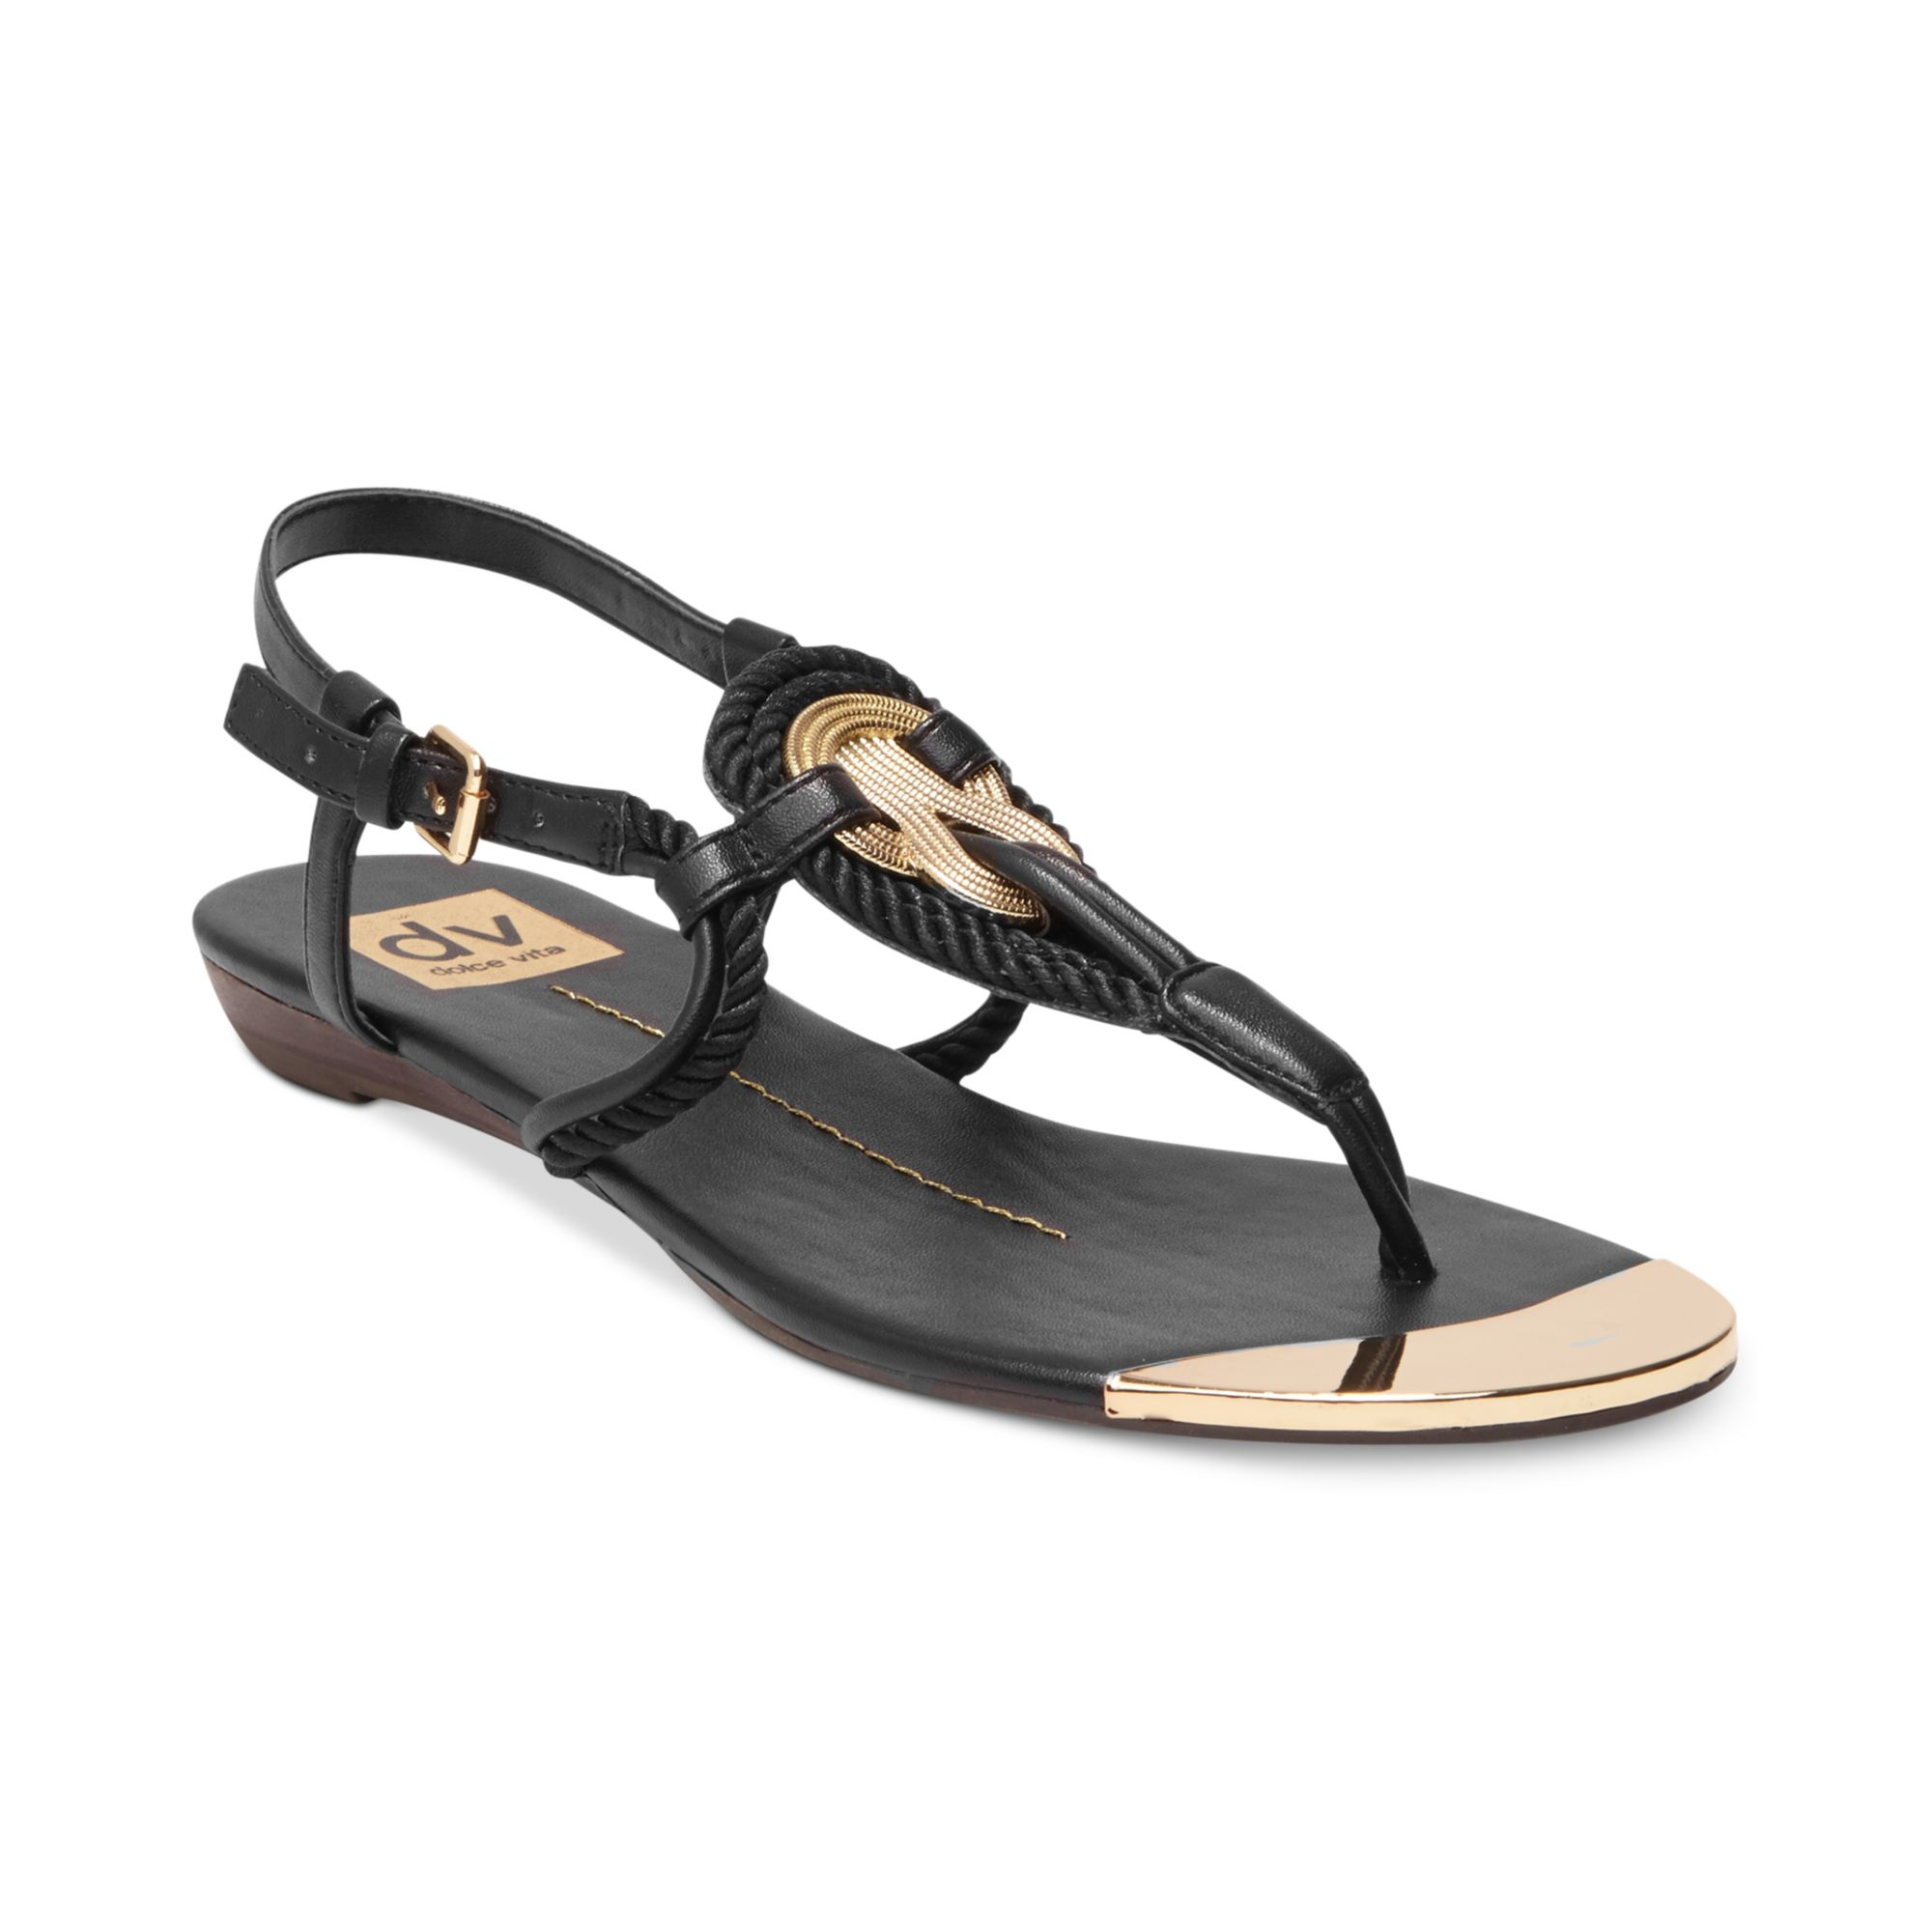 Dolce vita Dv By Anica Flat Thong Sandals in Black | Lyst